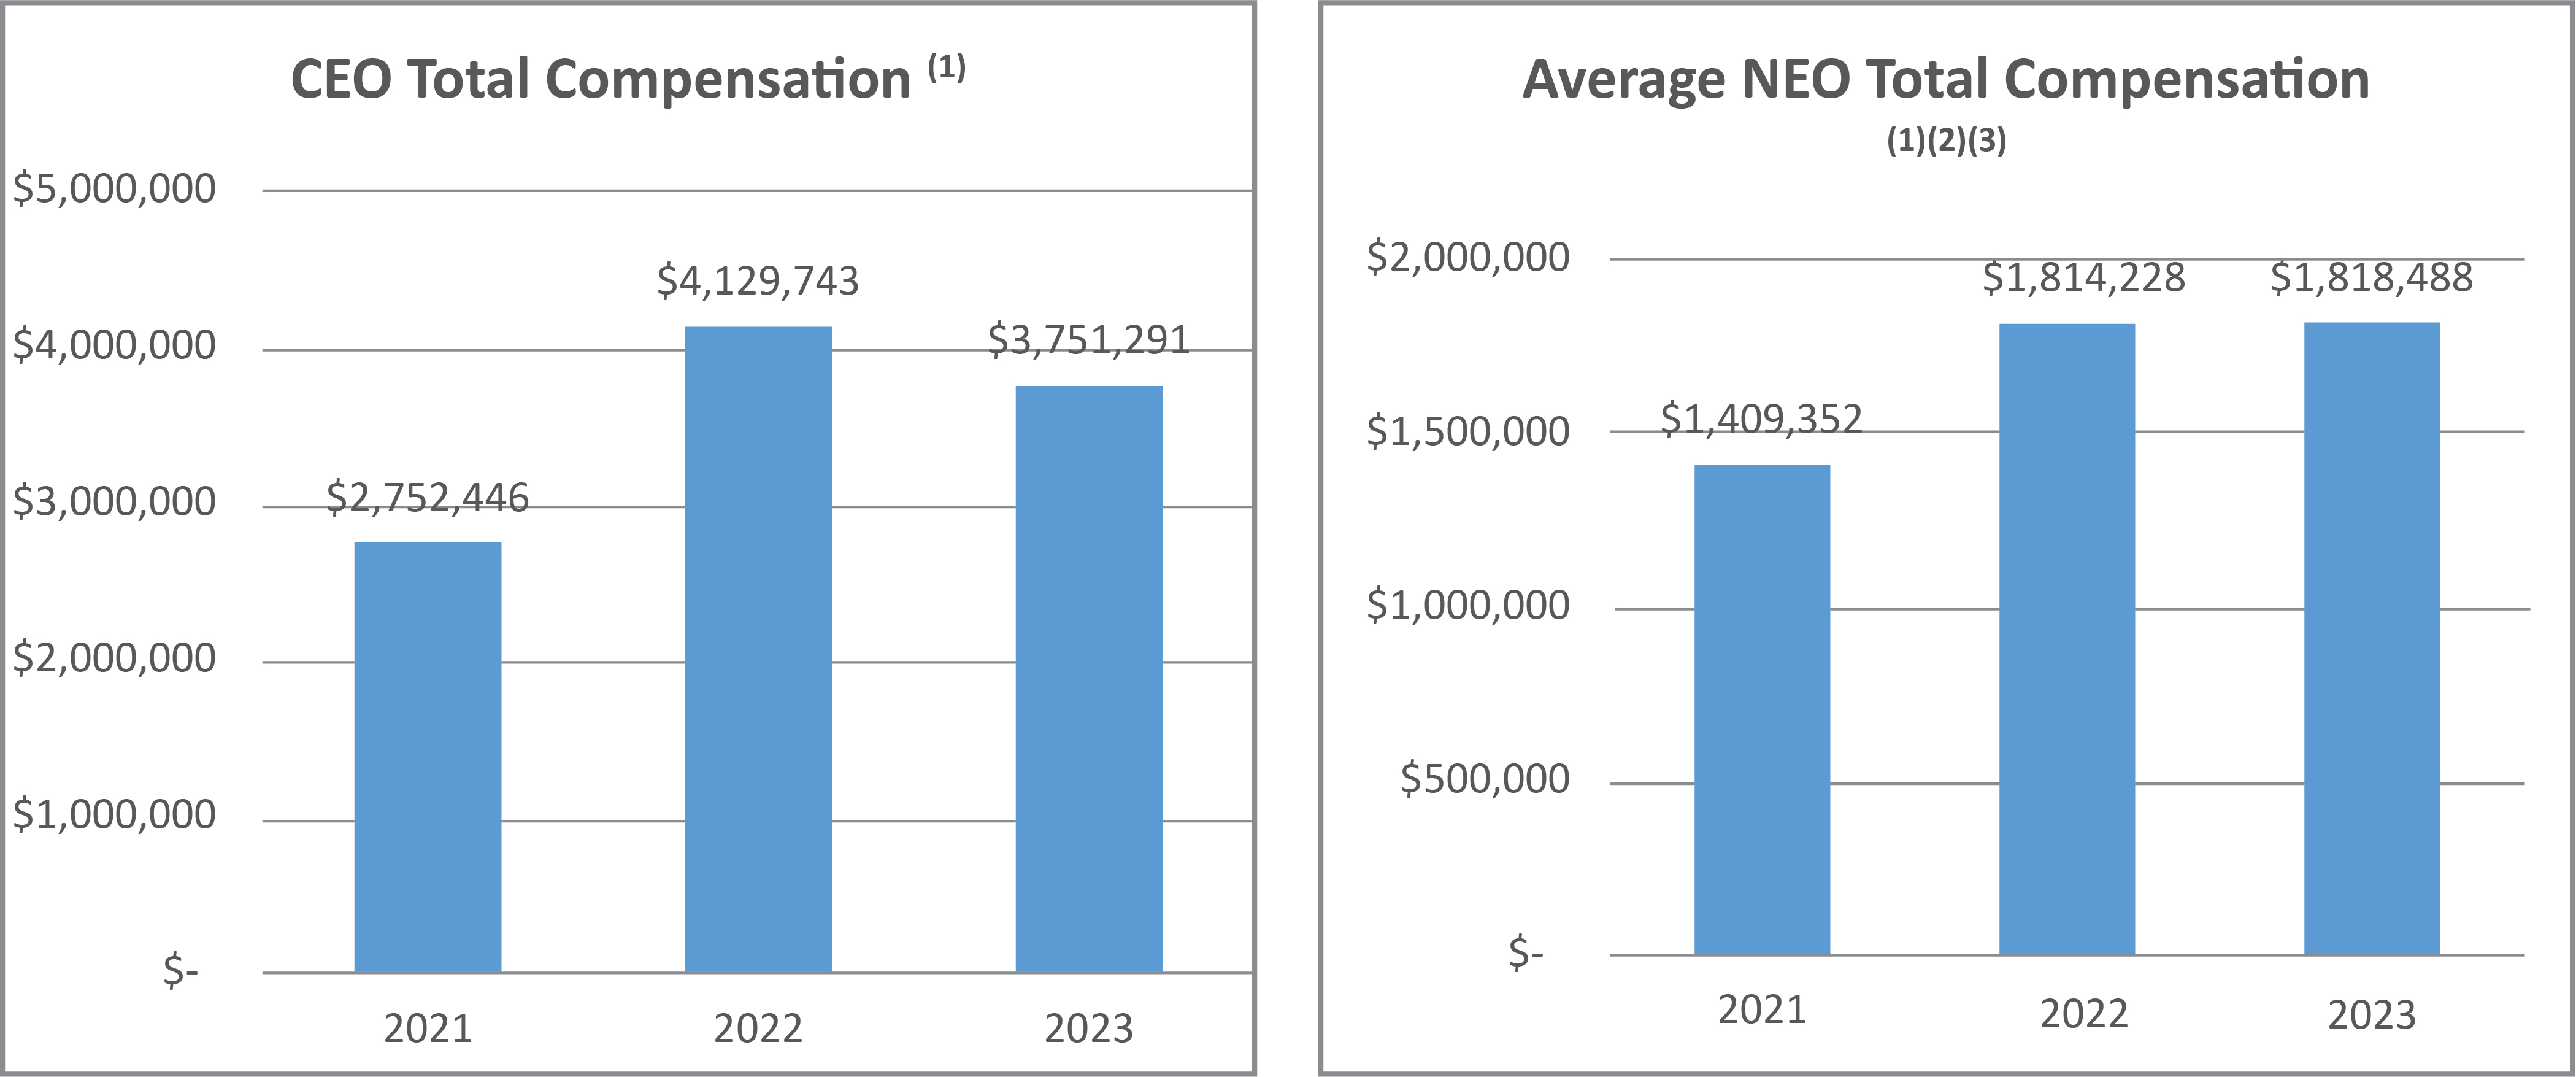 Bar graph of CEO total compensation in millions for FY2021 - FY2023 showing $2.75, $4.13, $3.75